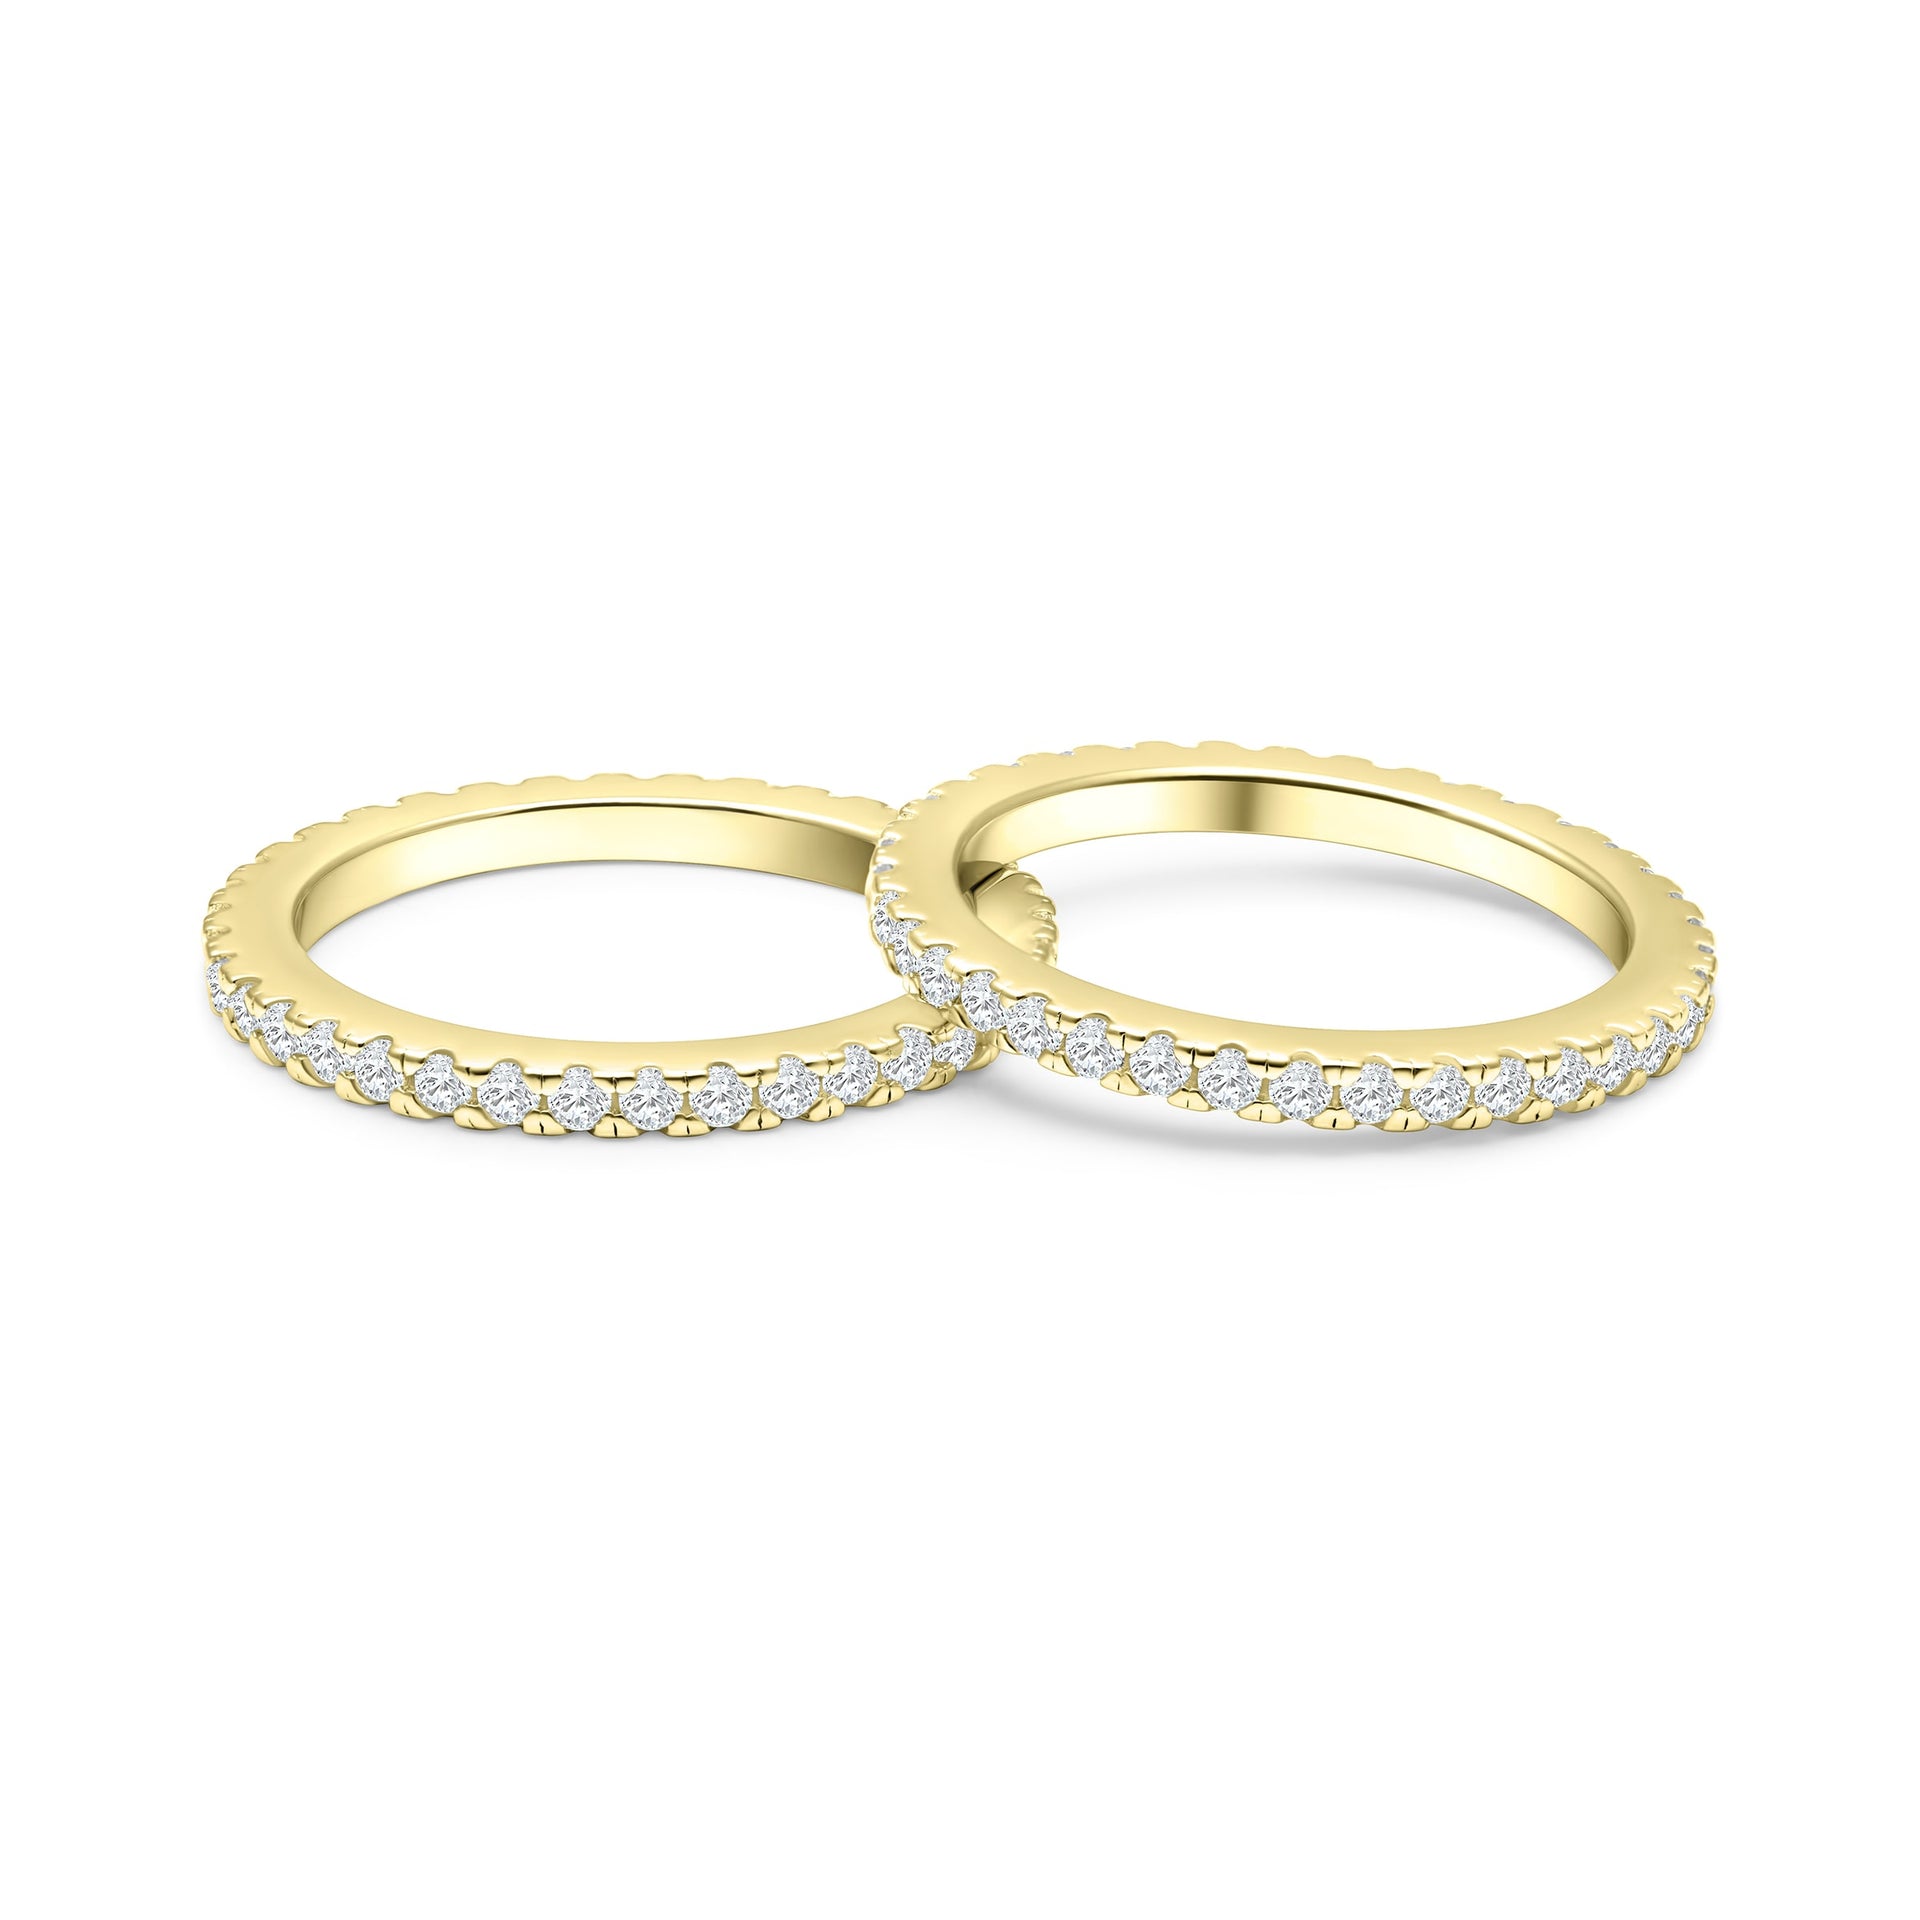 gold wedding band duo shown in gold